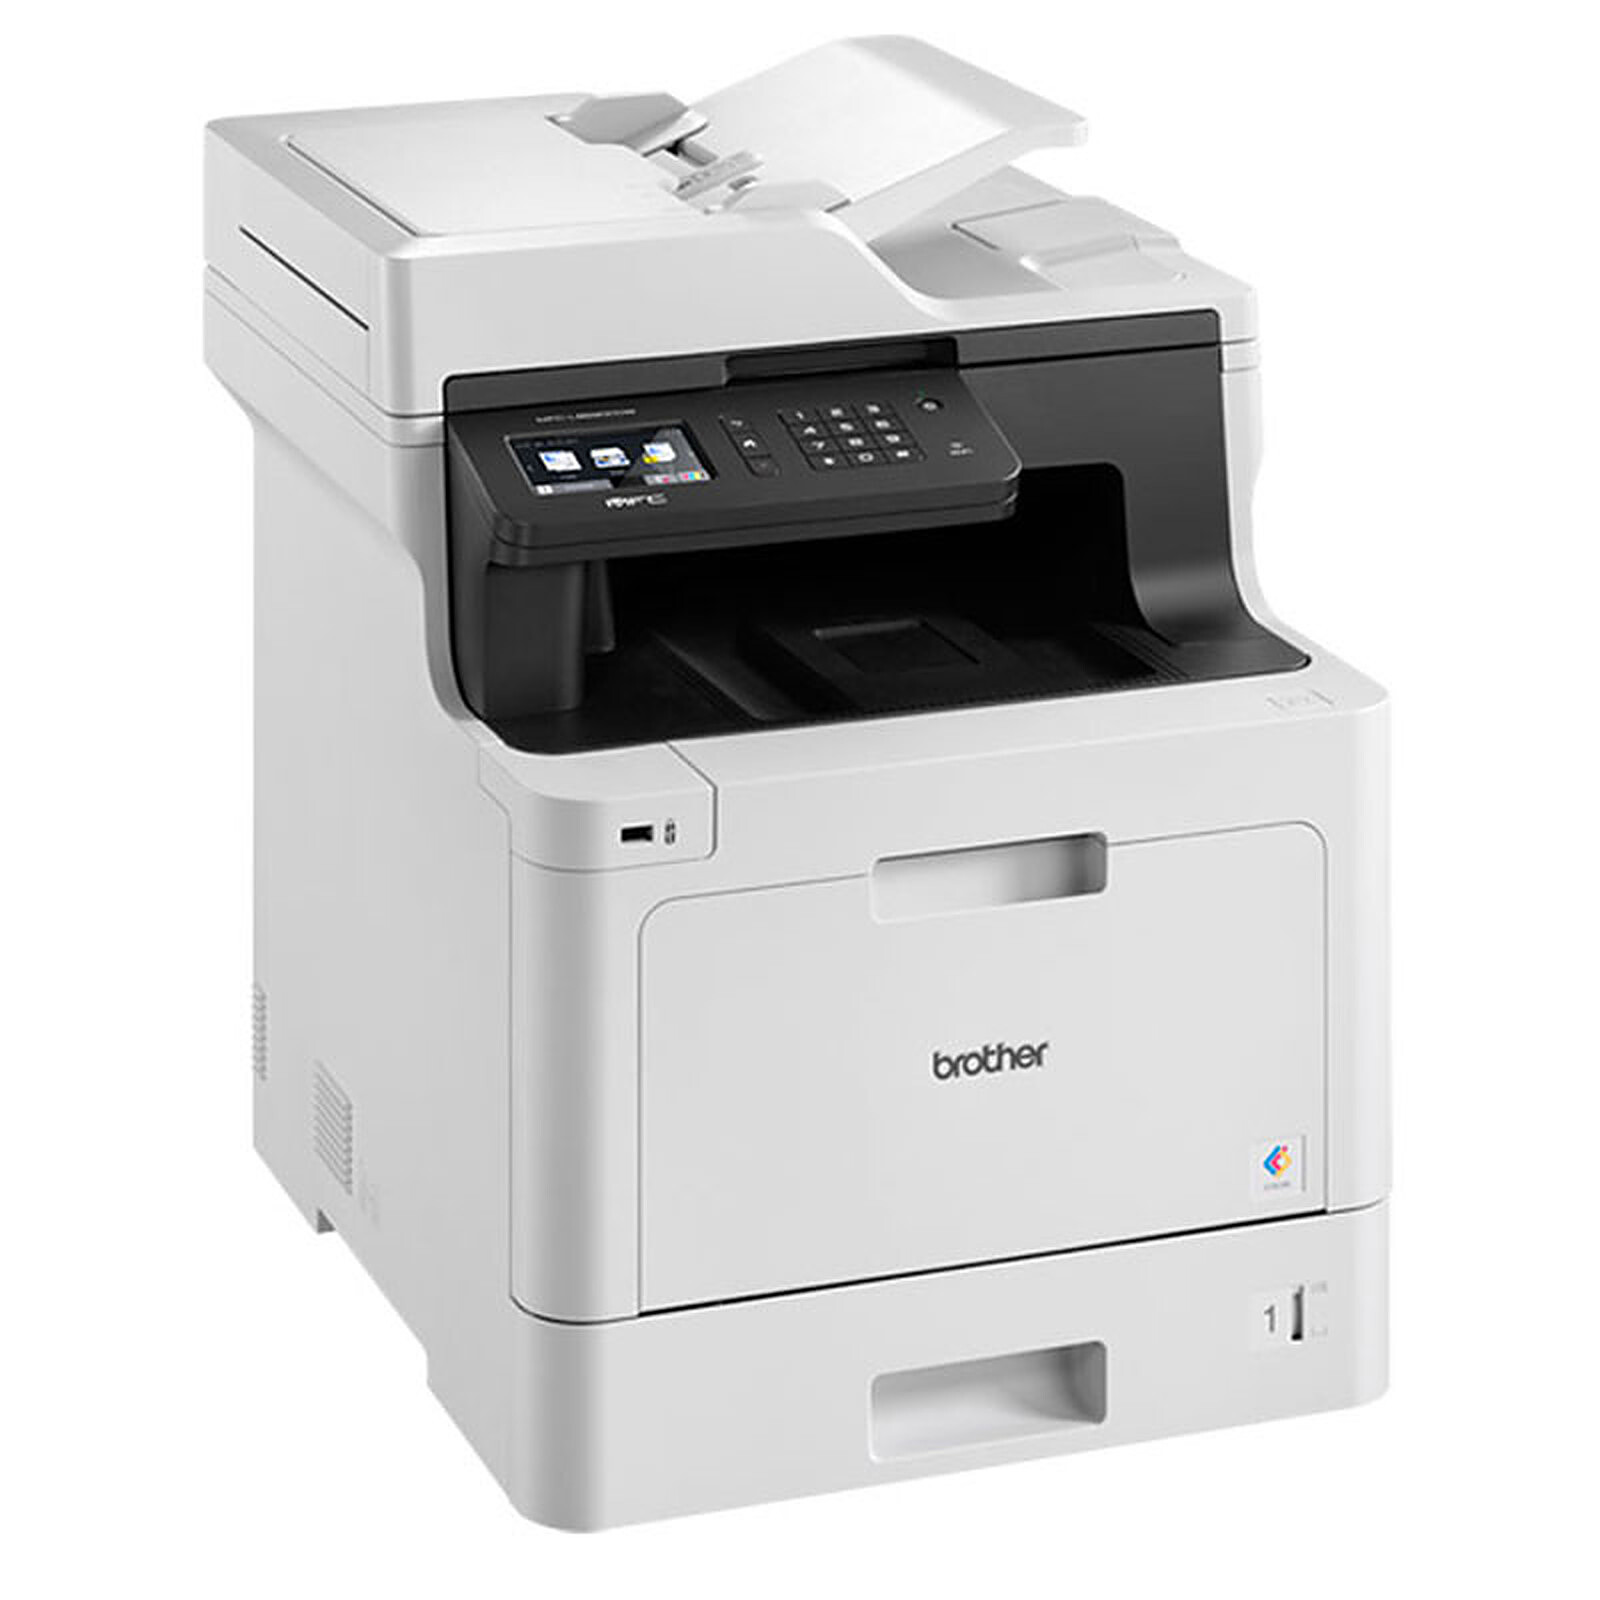 Brother MFC-L8690CDW + TN-421 - All-in-one printer - LDLC 3-year warranty